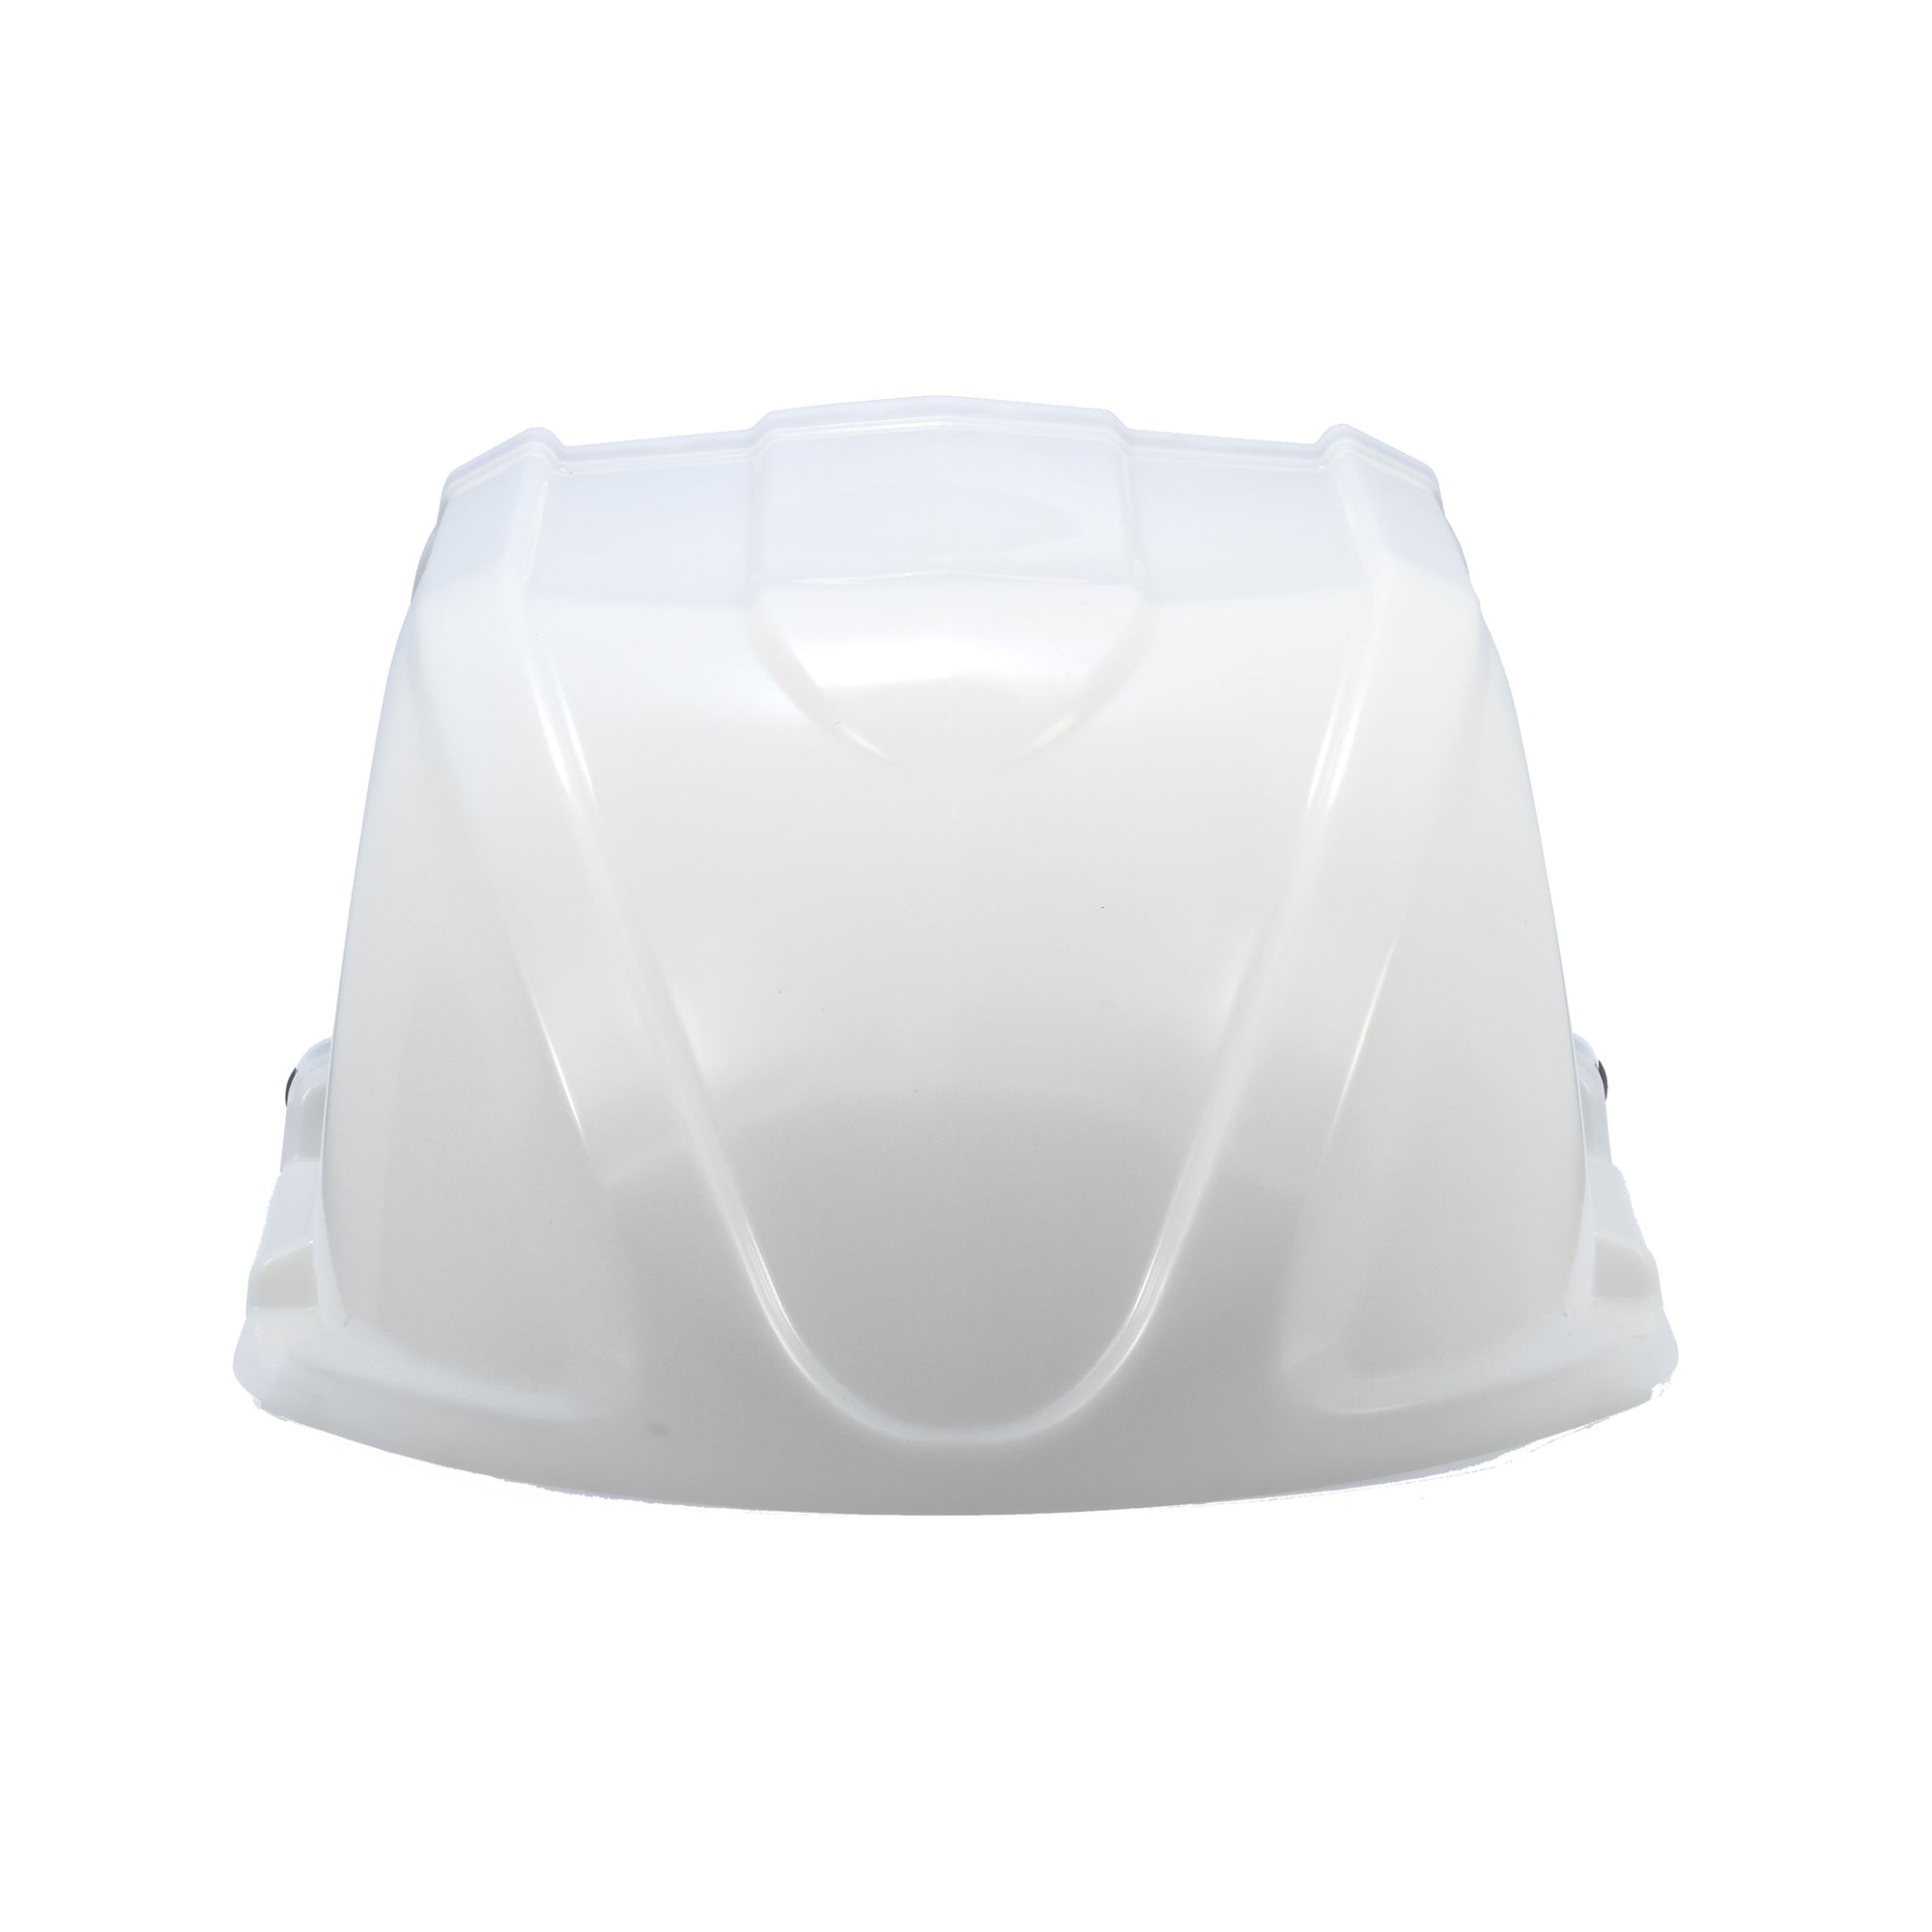 Camco 40446 XLT Roof Vent Cover - White, 5-Pack